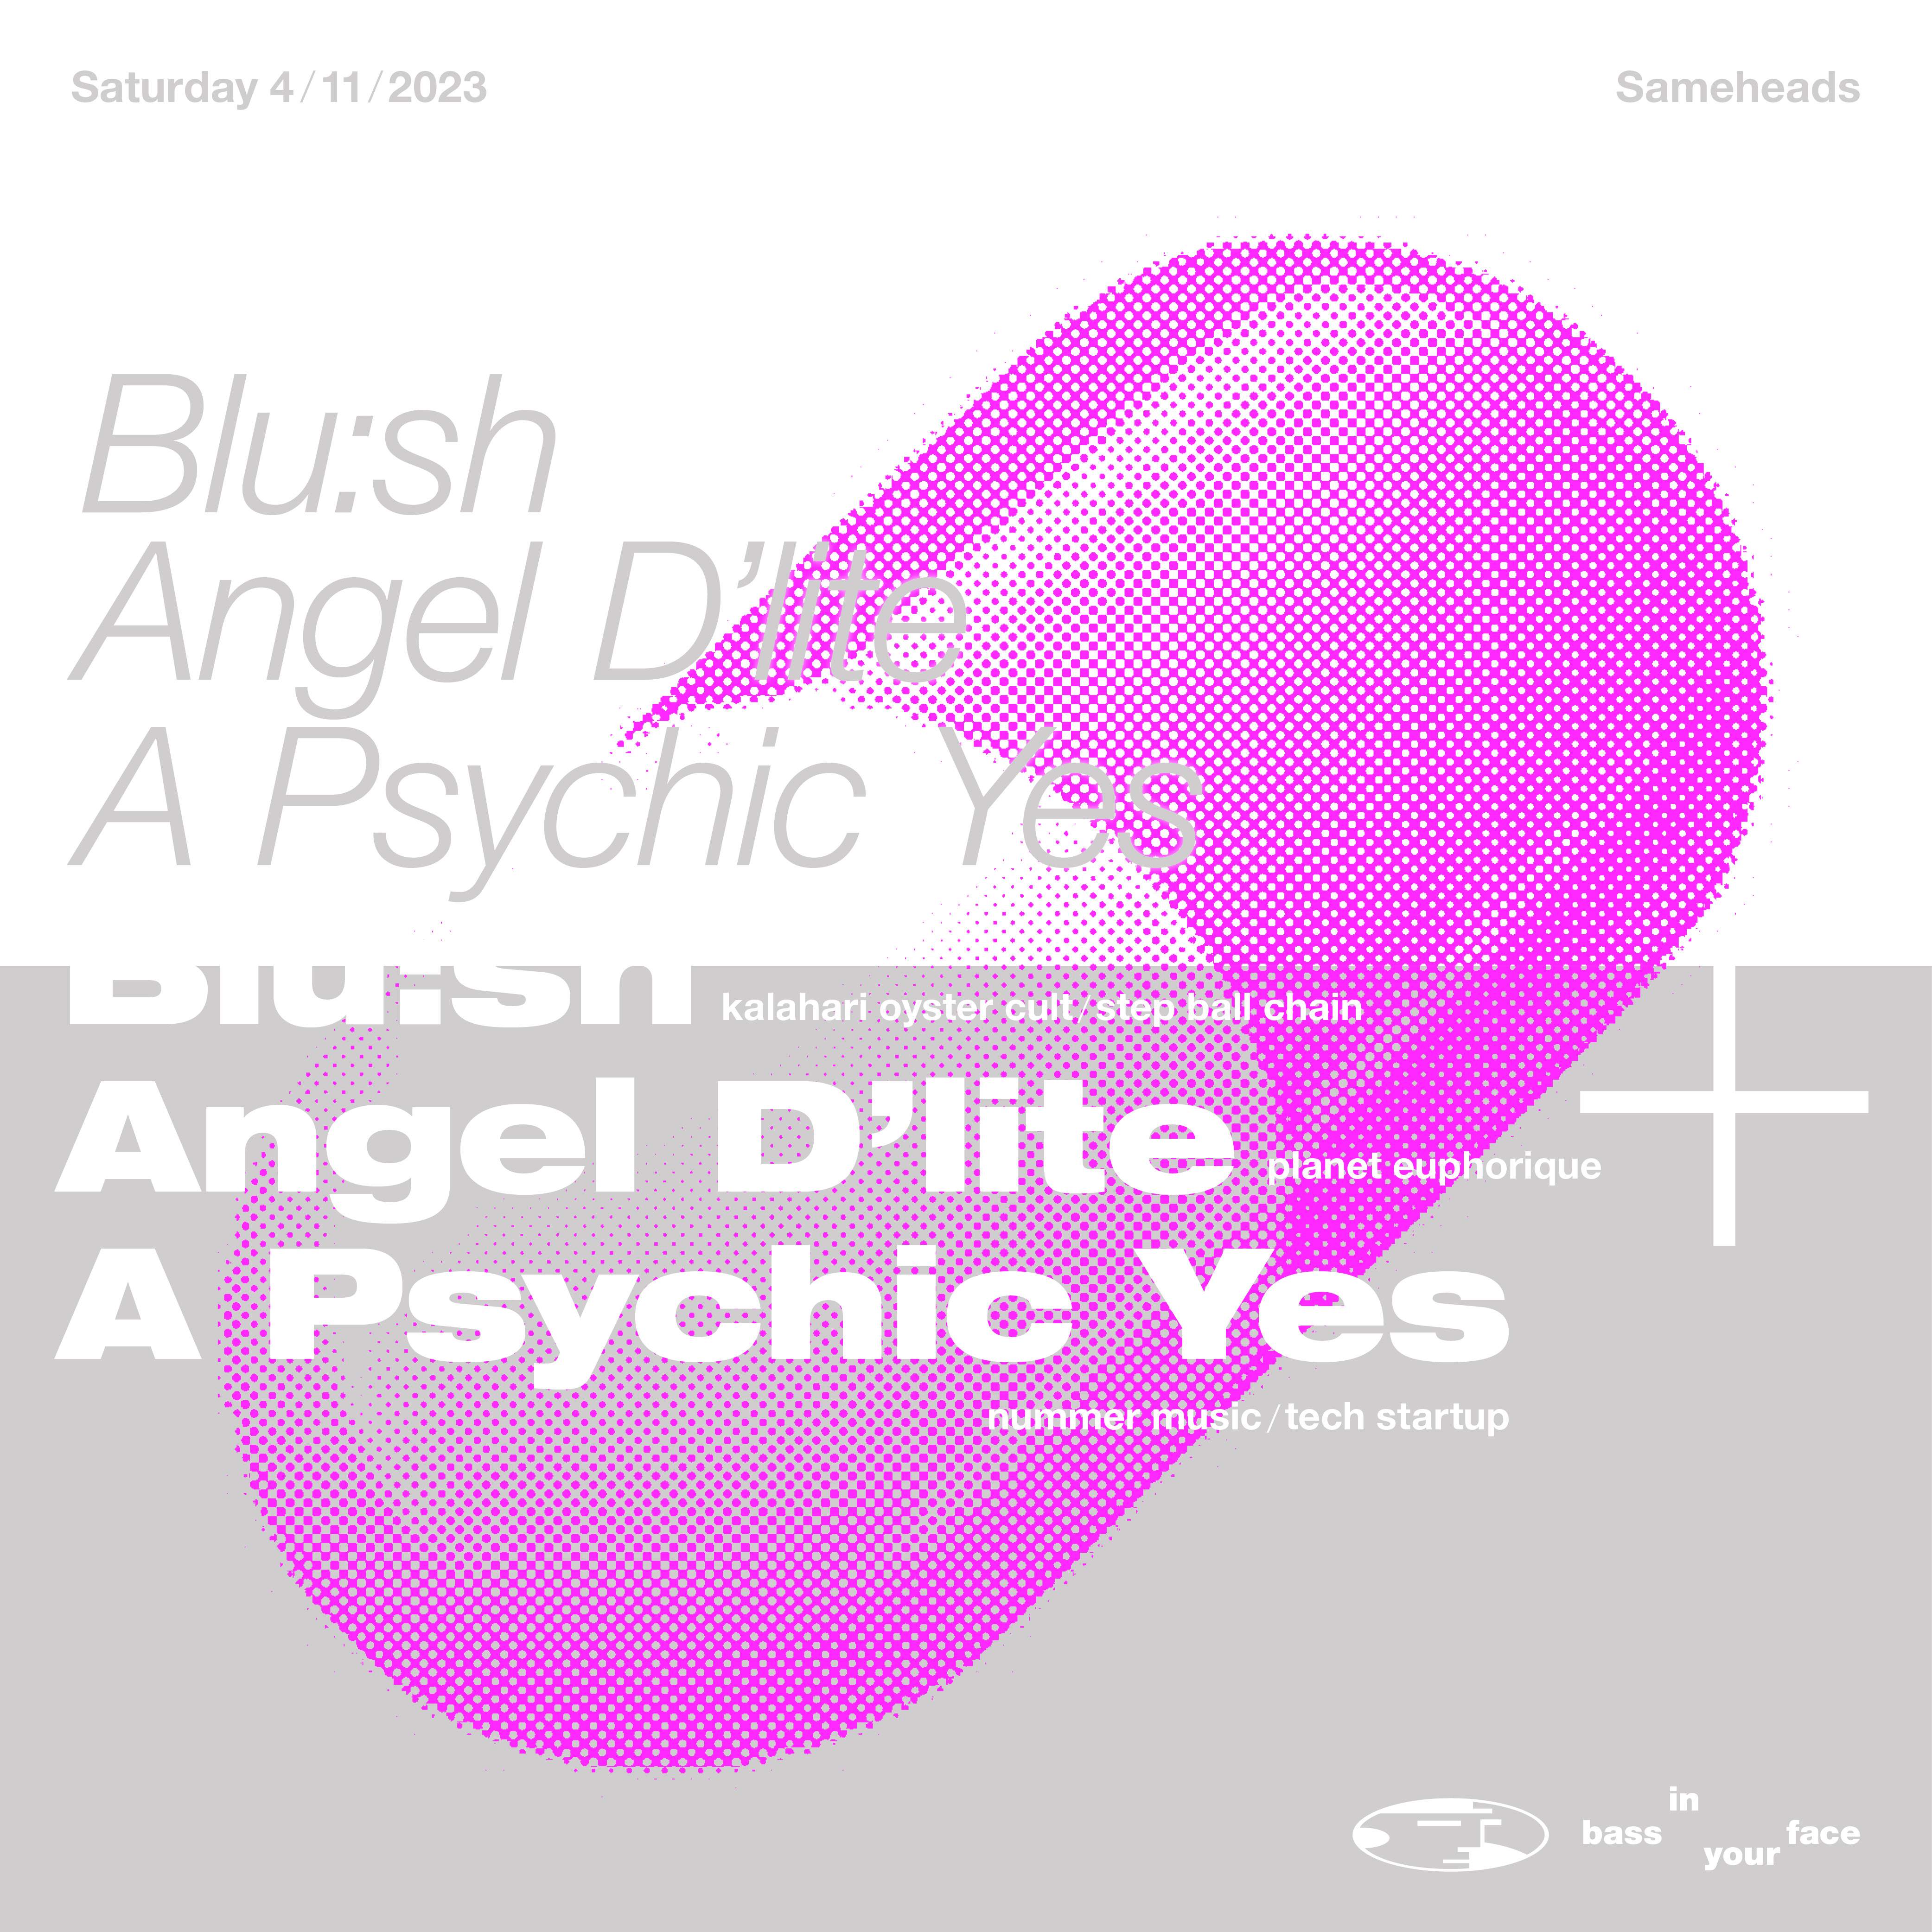 Banlieue Records with Angel D'lite, Blu:sh & A Psychic Yes - Página frontal